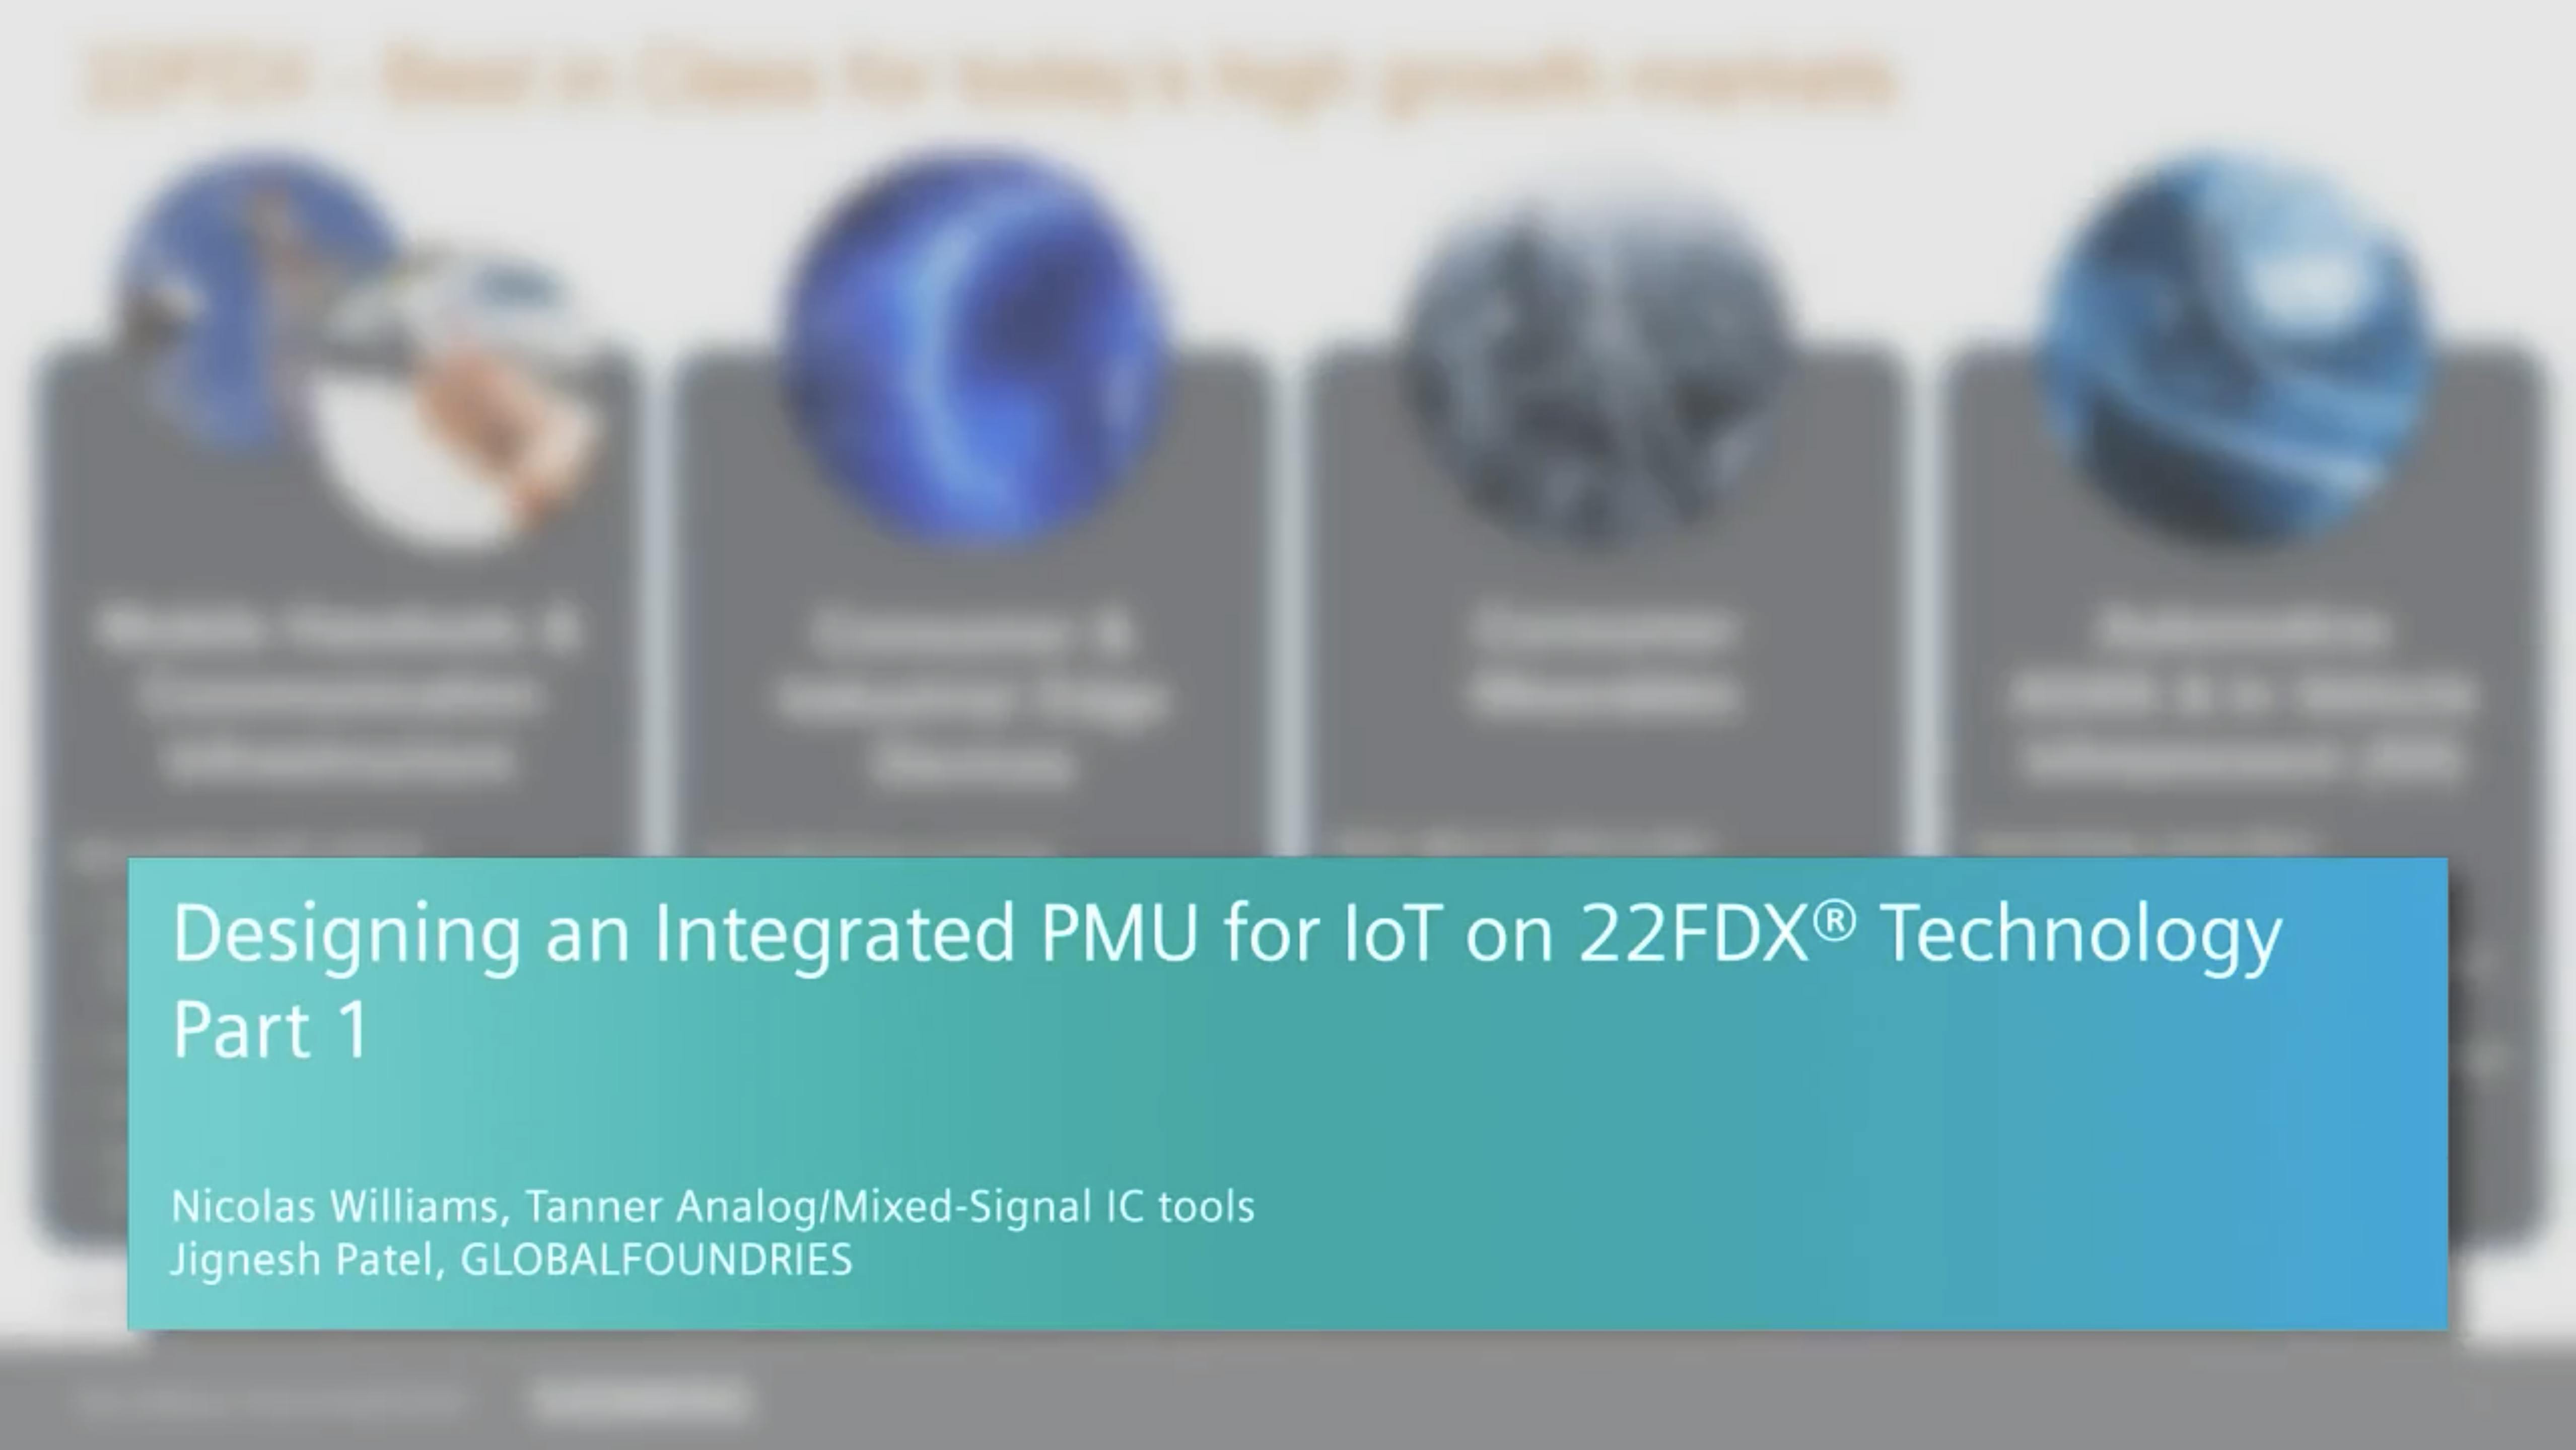 Designing an Integrated PMU for IoT on 22FDX® Technology - Part 1